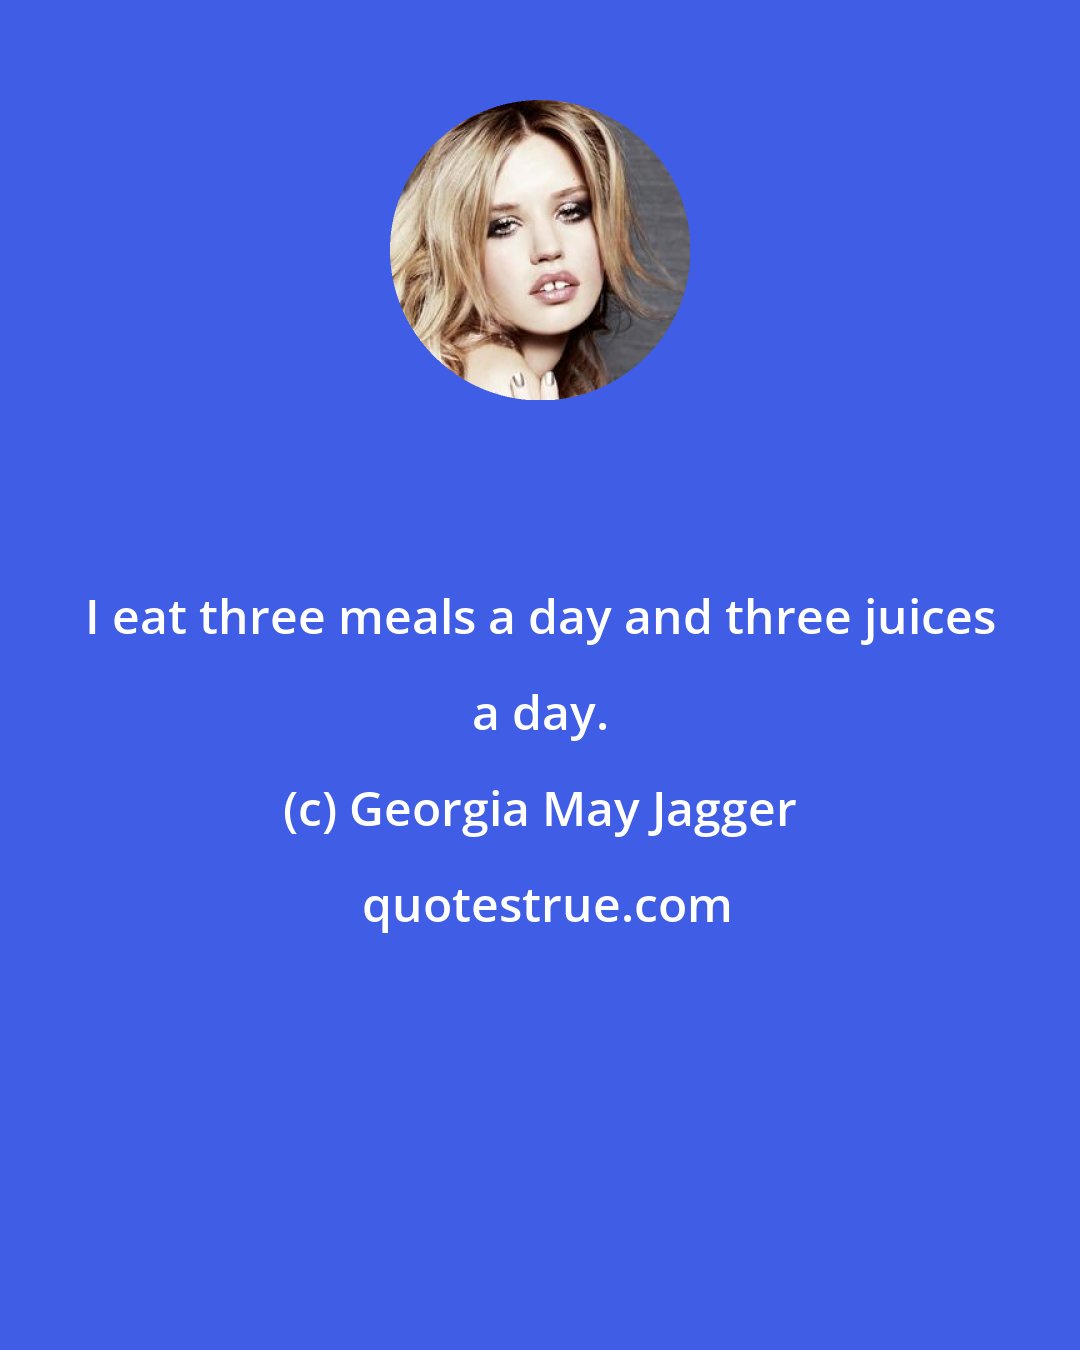 Georgia May Jagger: I eat three meals a day and three juices a day.